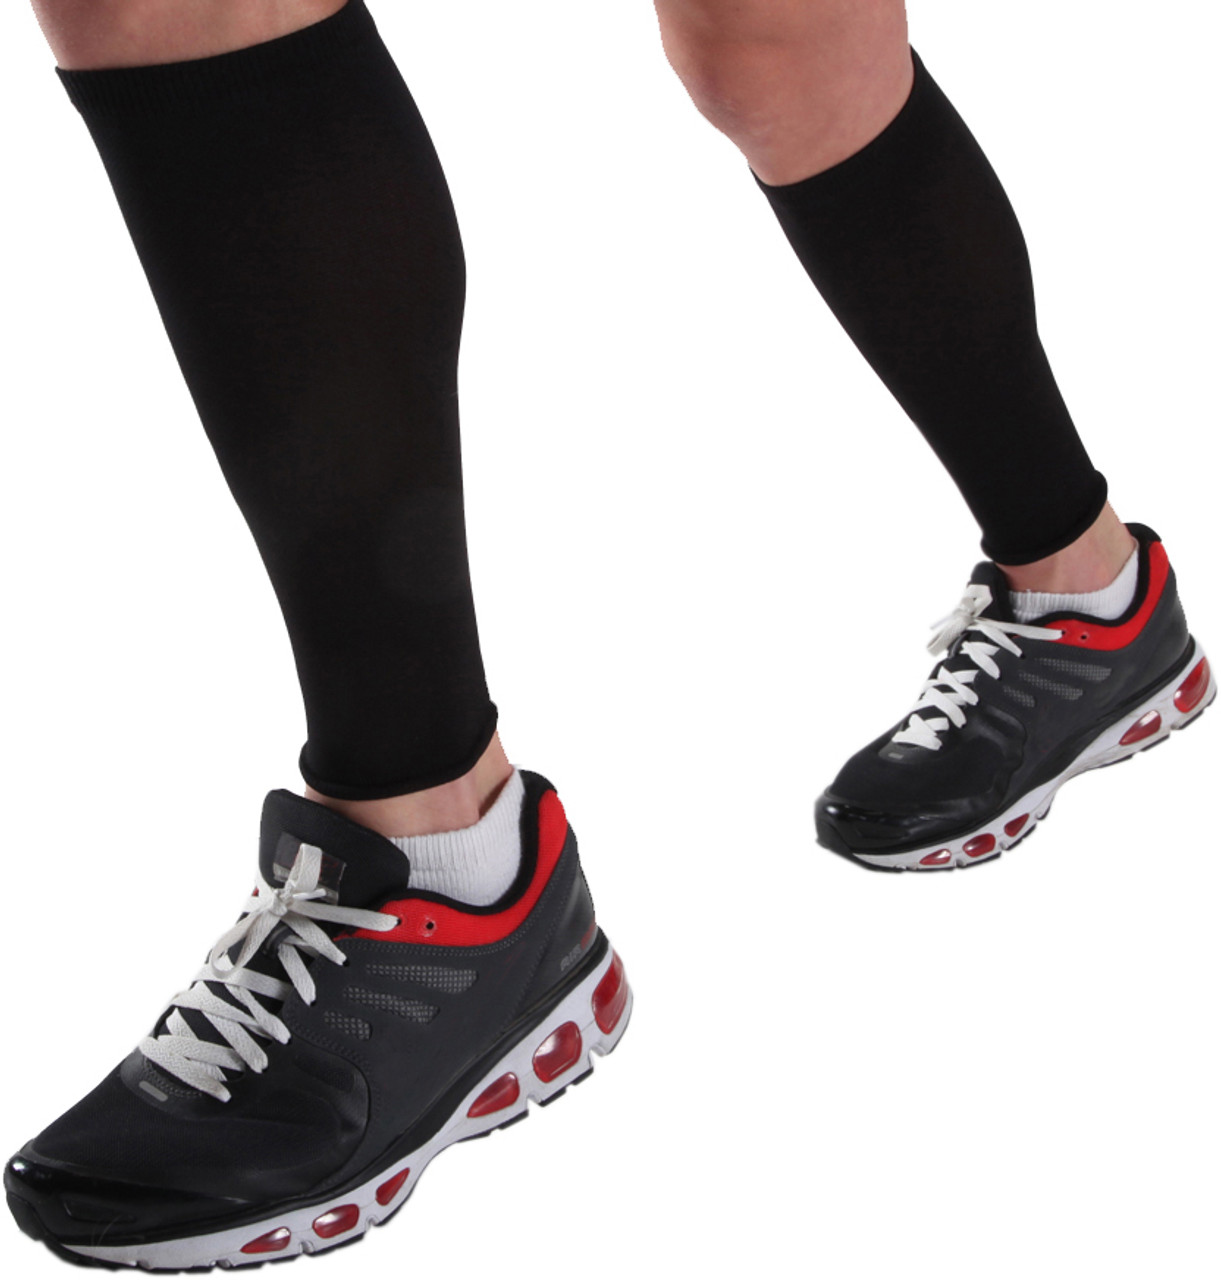 Foam Padded Compression Calf Support Sleeve for Sport Protection